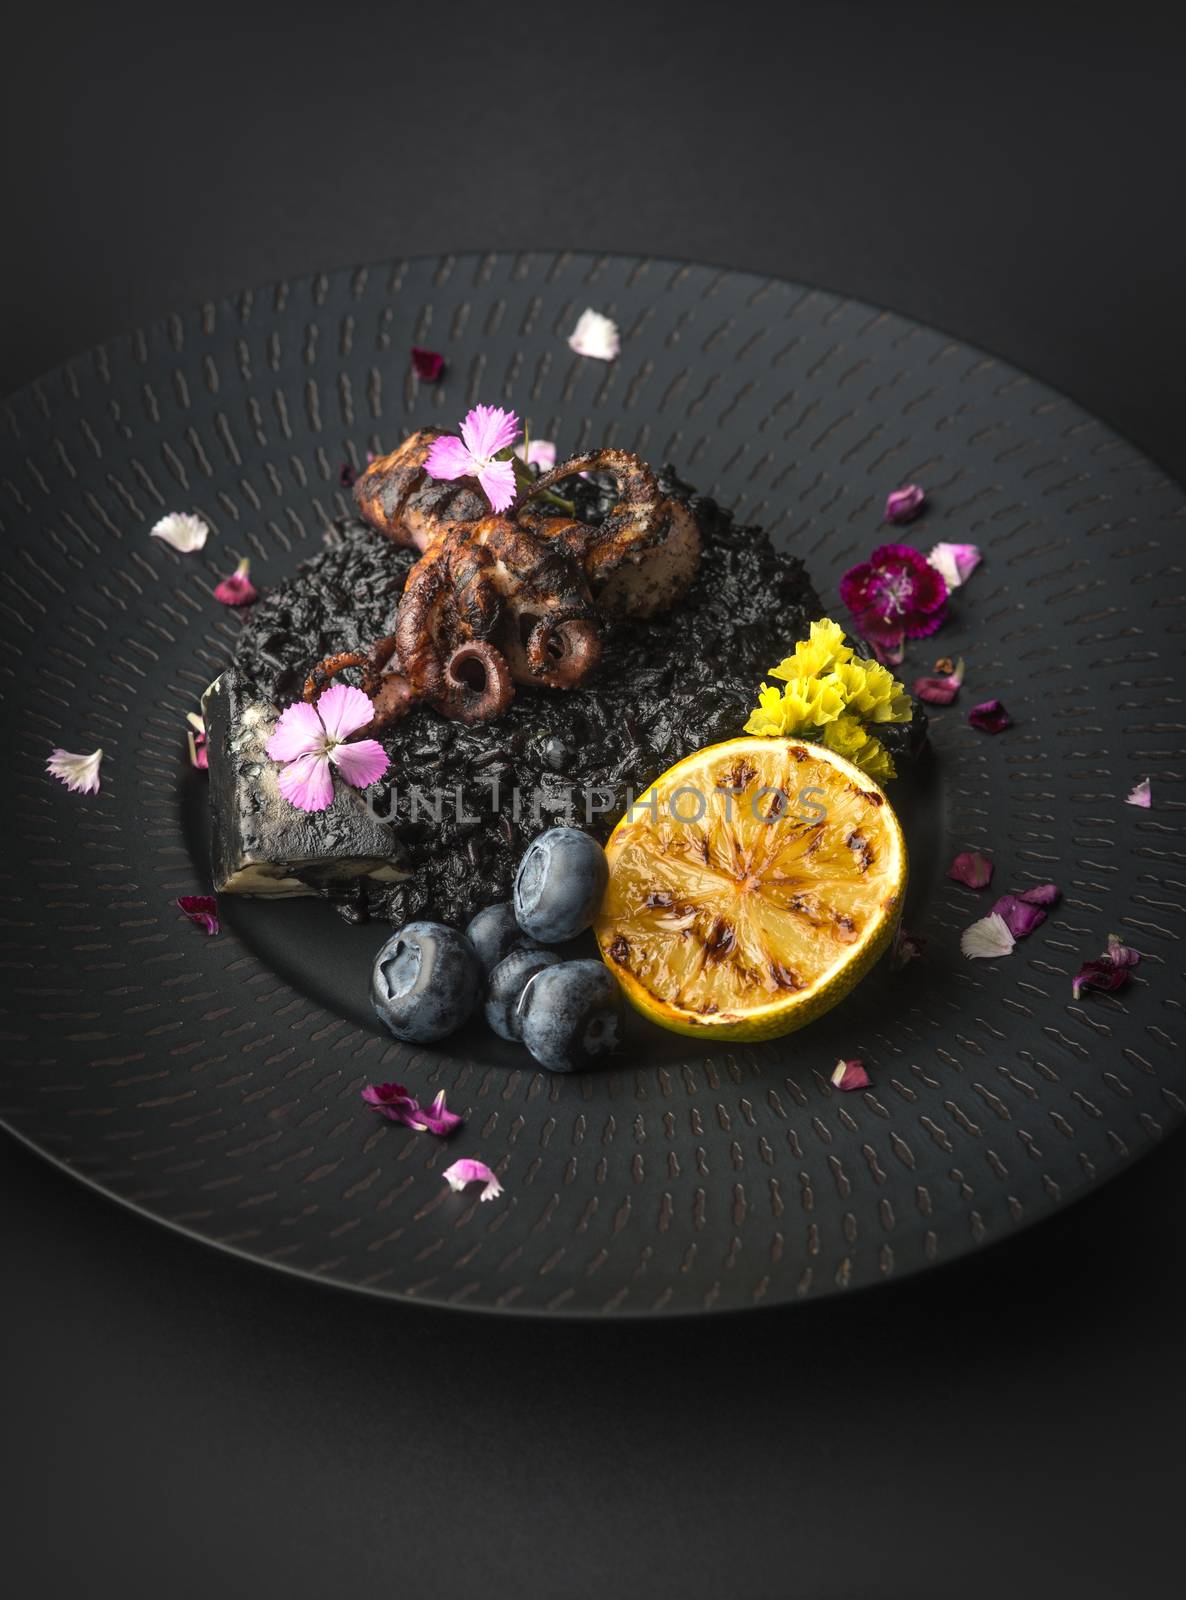 Risotto with octopus and blueberries on a black plate by shivanetua